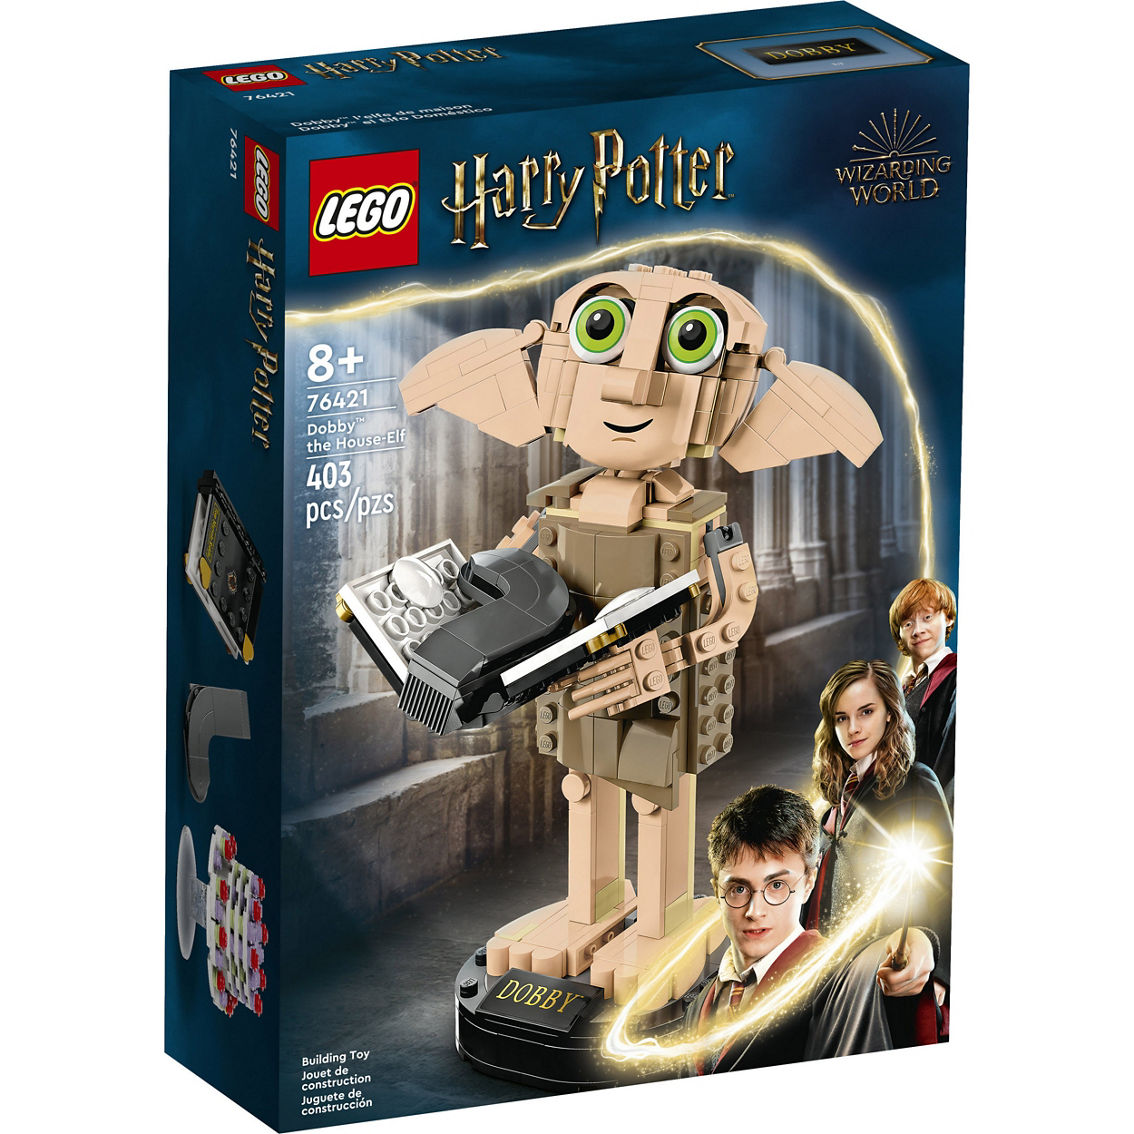 LEGO Harry Potter Dobby the House-Elf Build and Display Set 76421 - Image 1 of 10